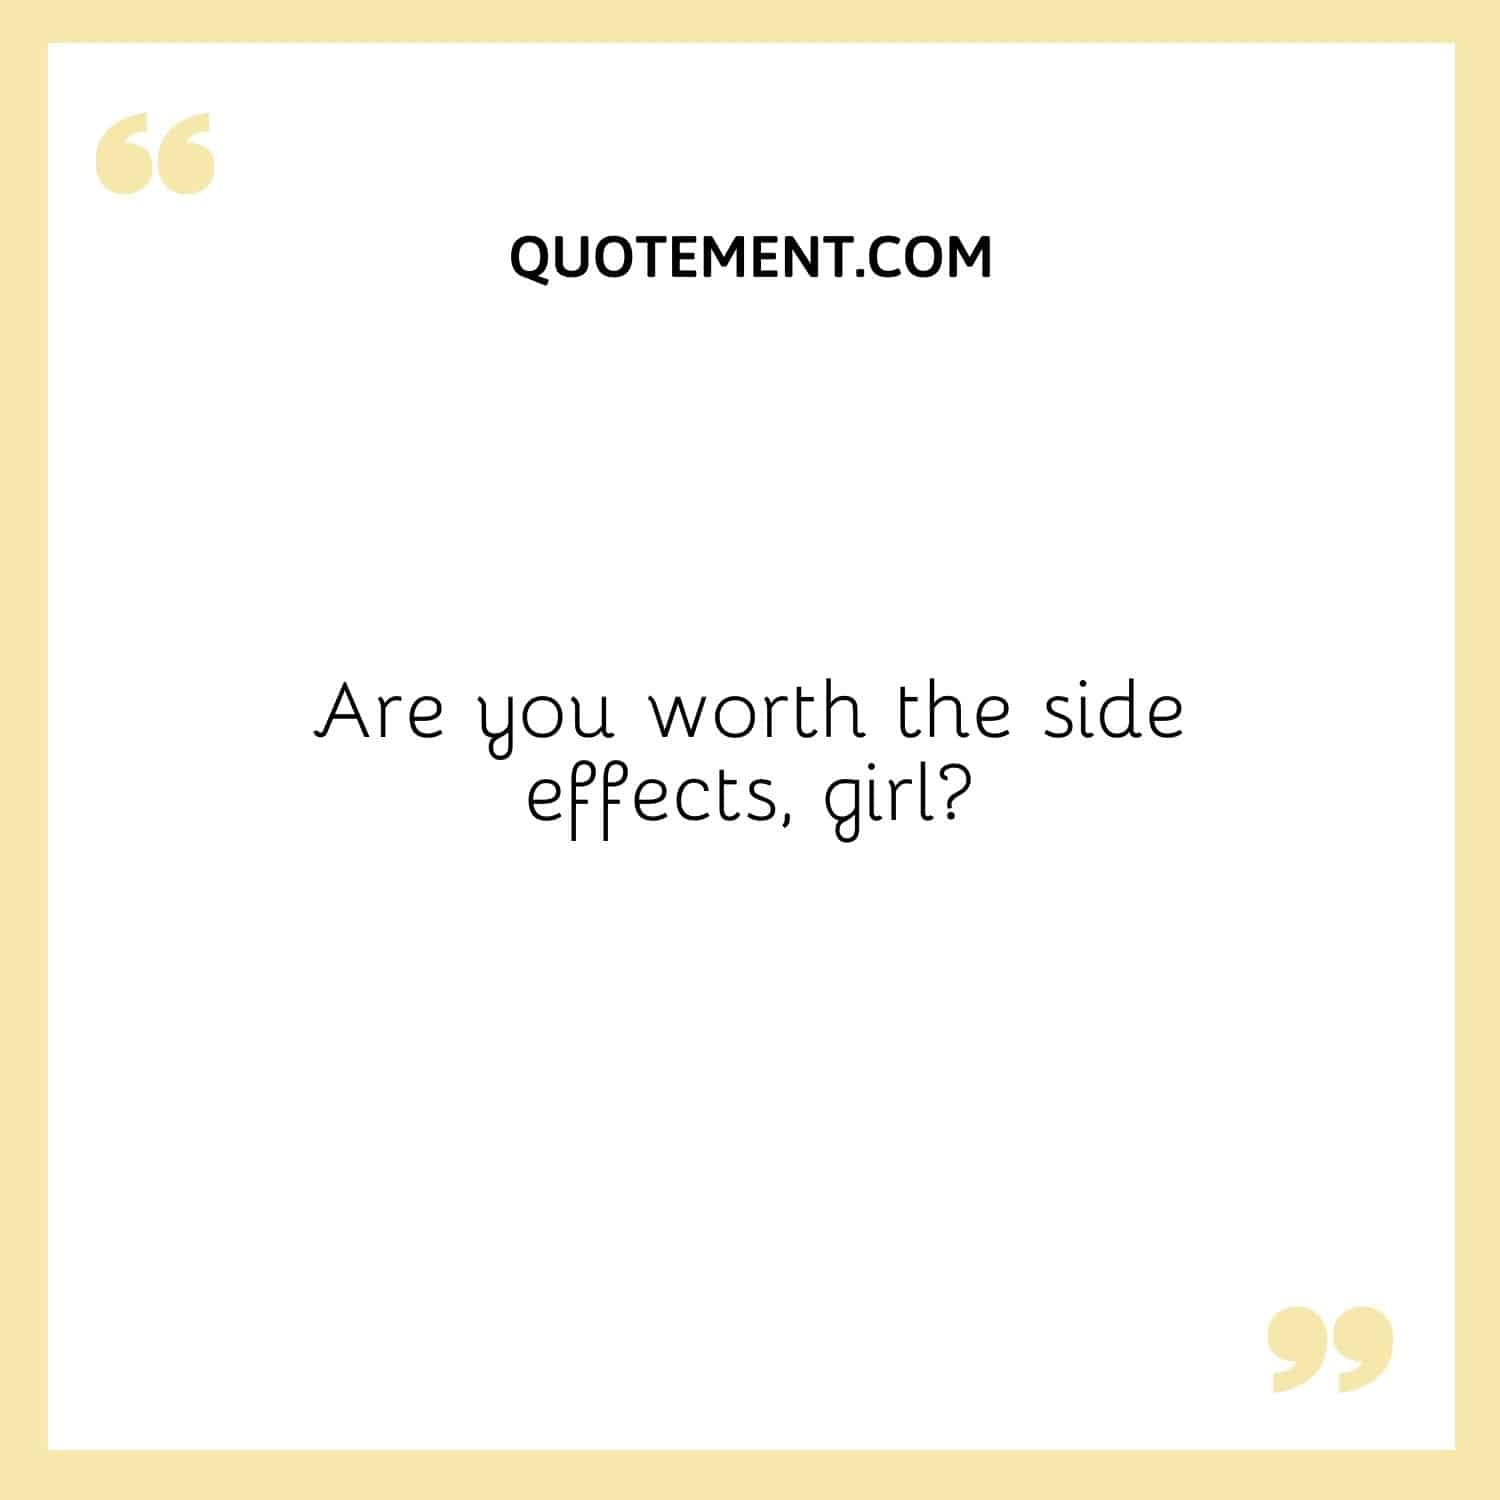 Are you worth the side effects, girl